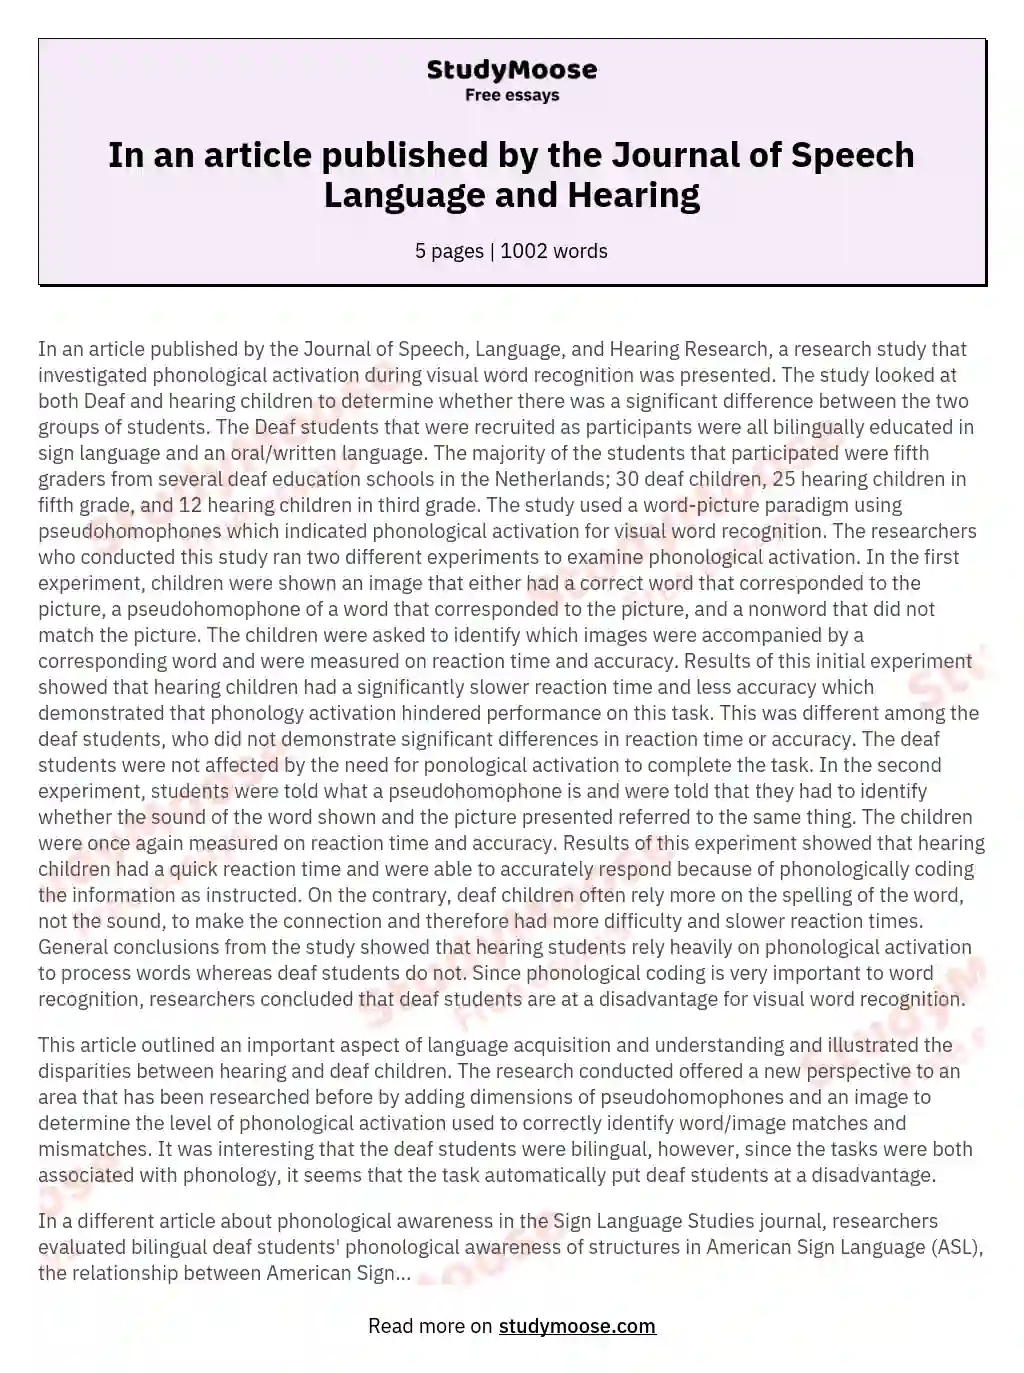 In an article published by the Journal of Speech Language and Hearing